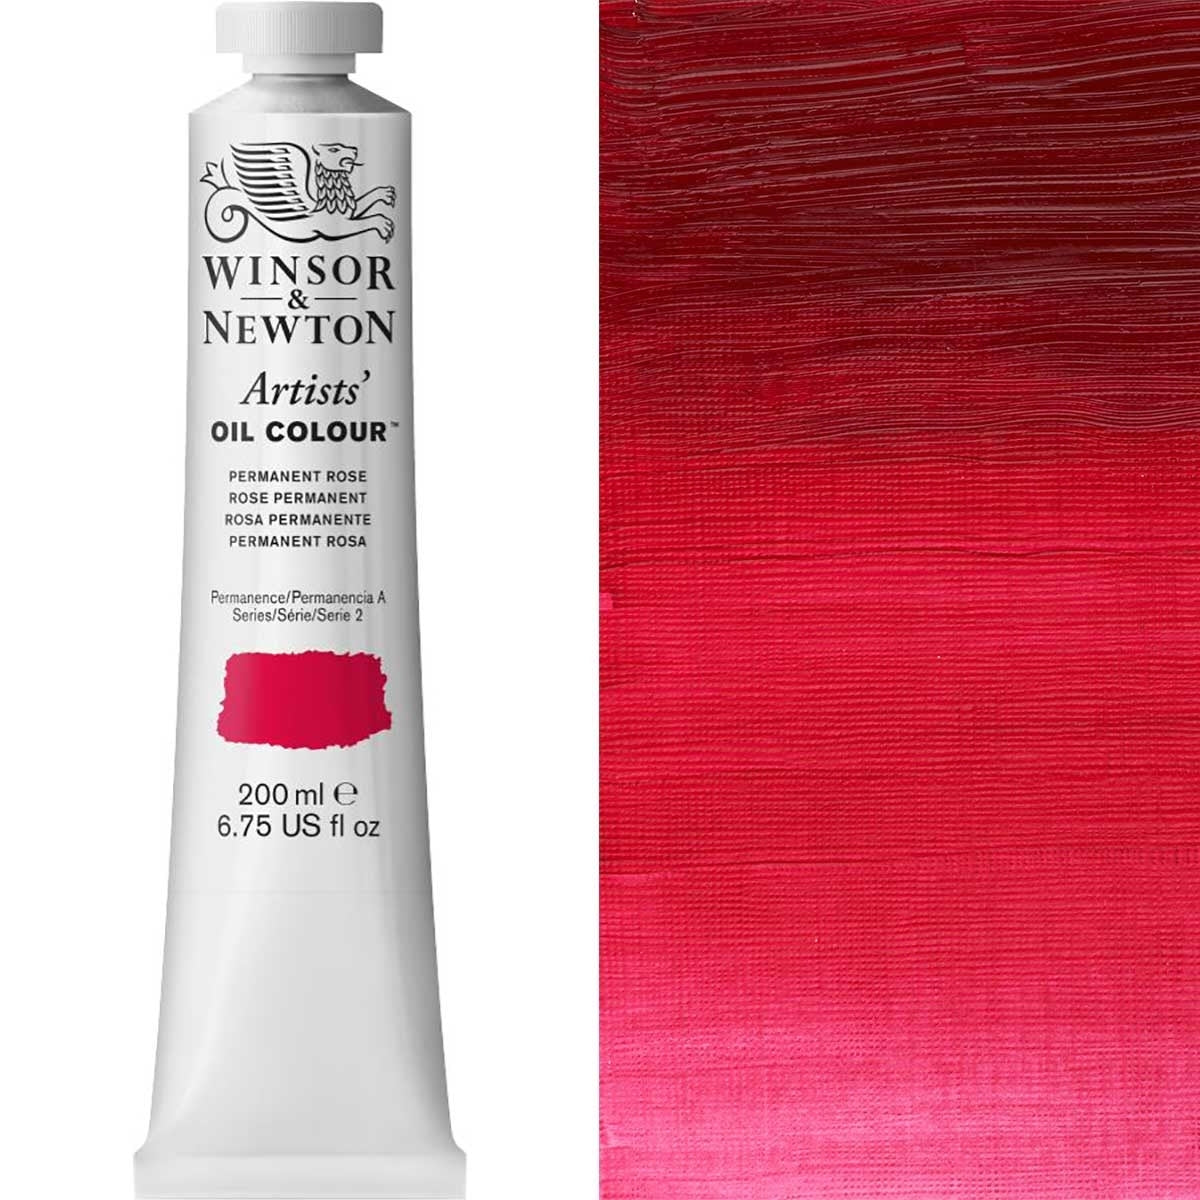 Winsor and Newton - Artists' Oil Colour - 200ml - Permanent Rose